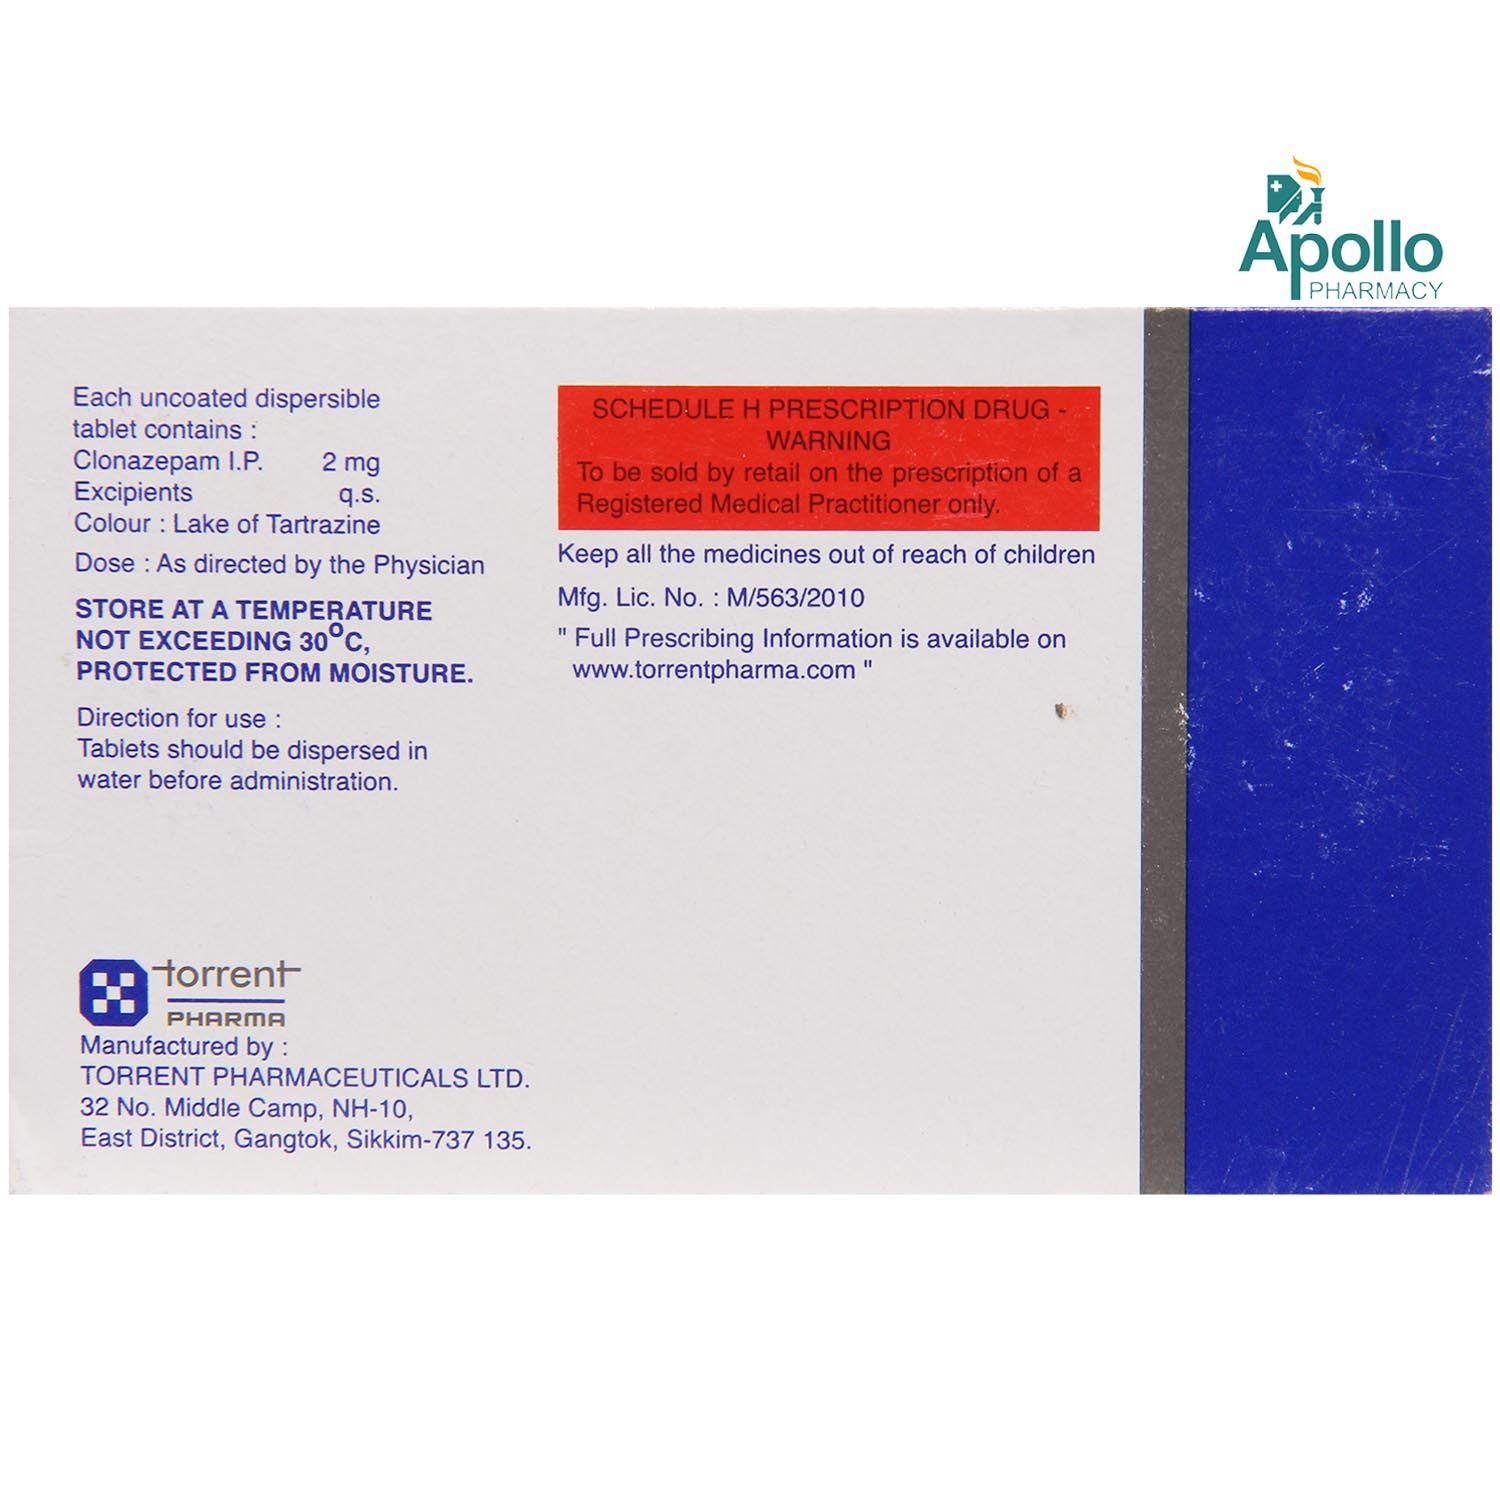 CLONOTRIL 2MG TABLET Price, Uses, Side Effects, Composition - Apollo